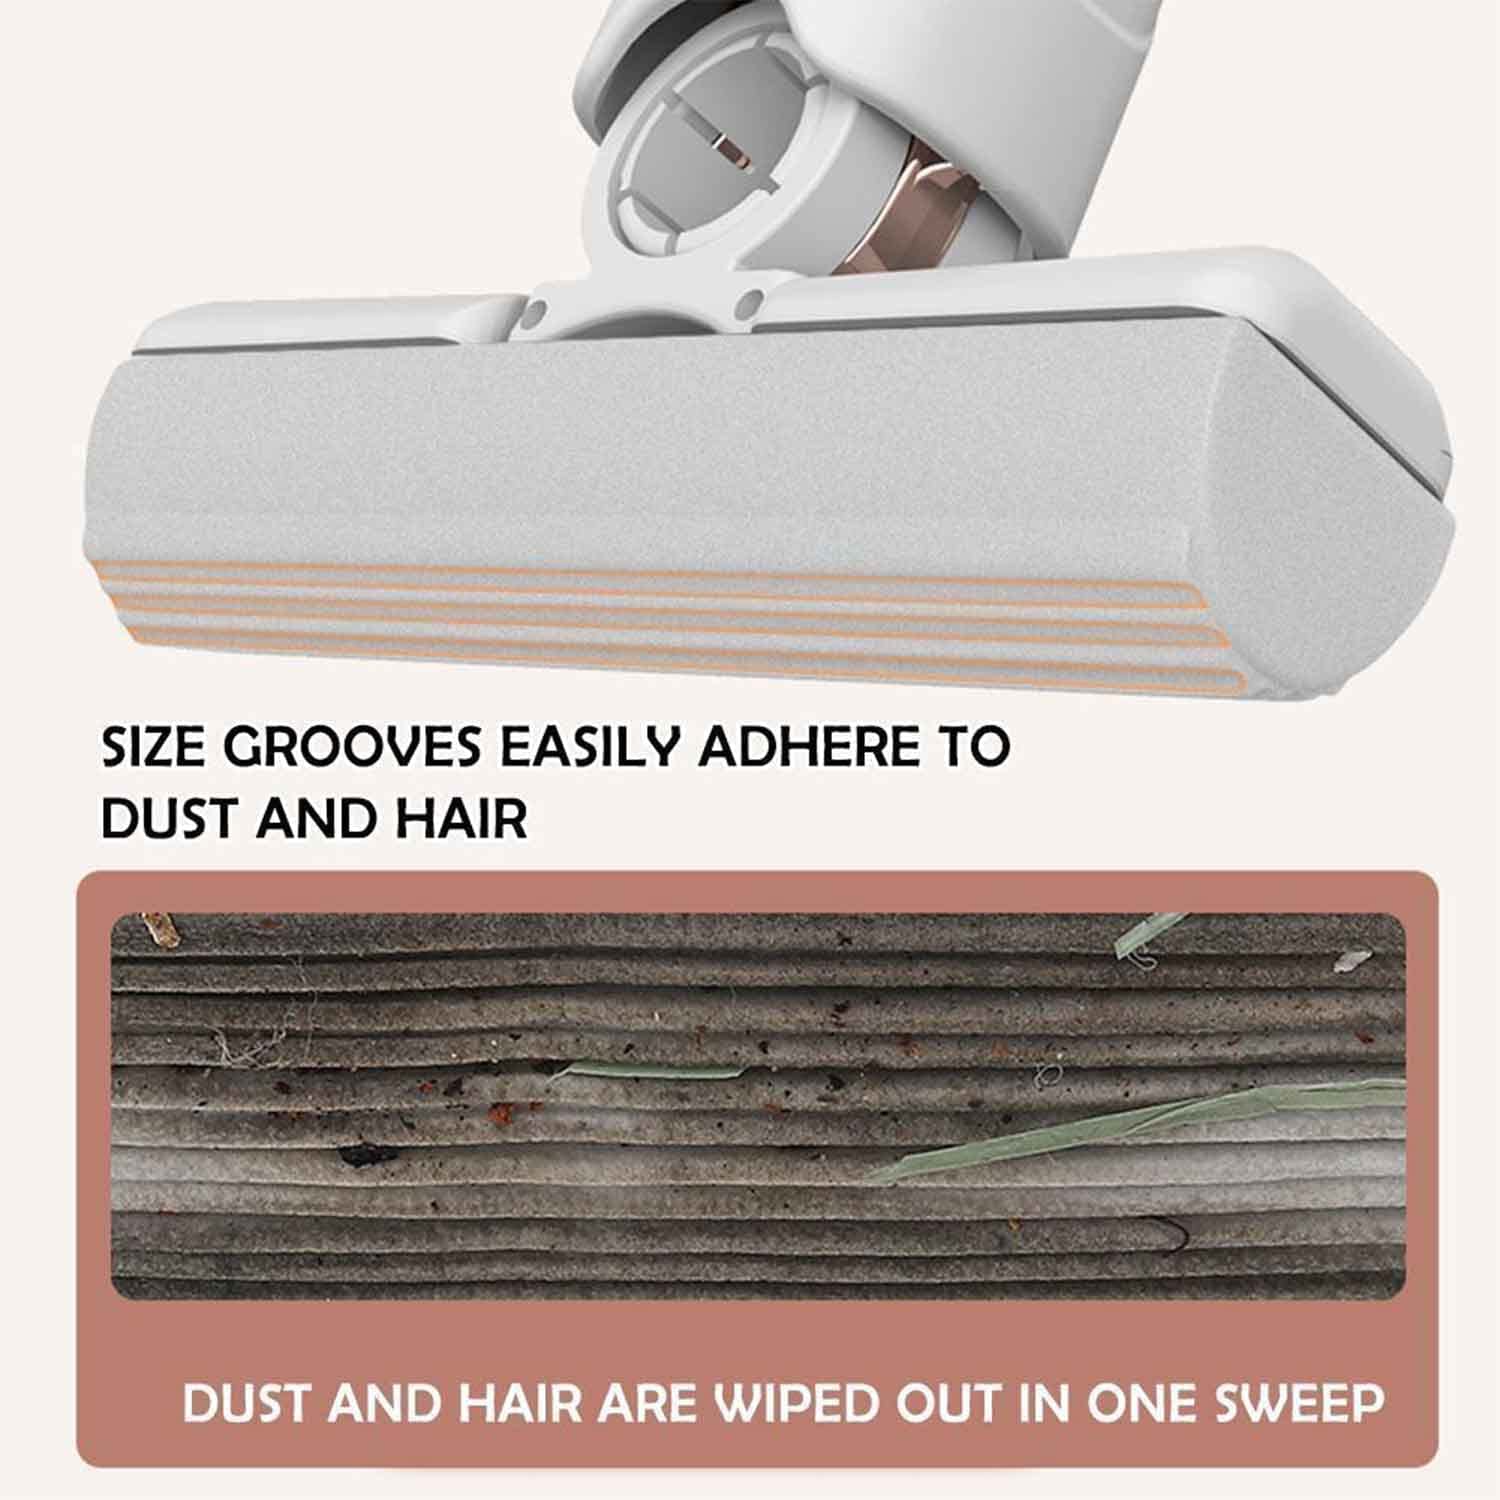 Size Grooves easily adhere to dust and hair